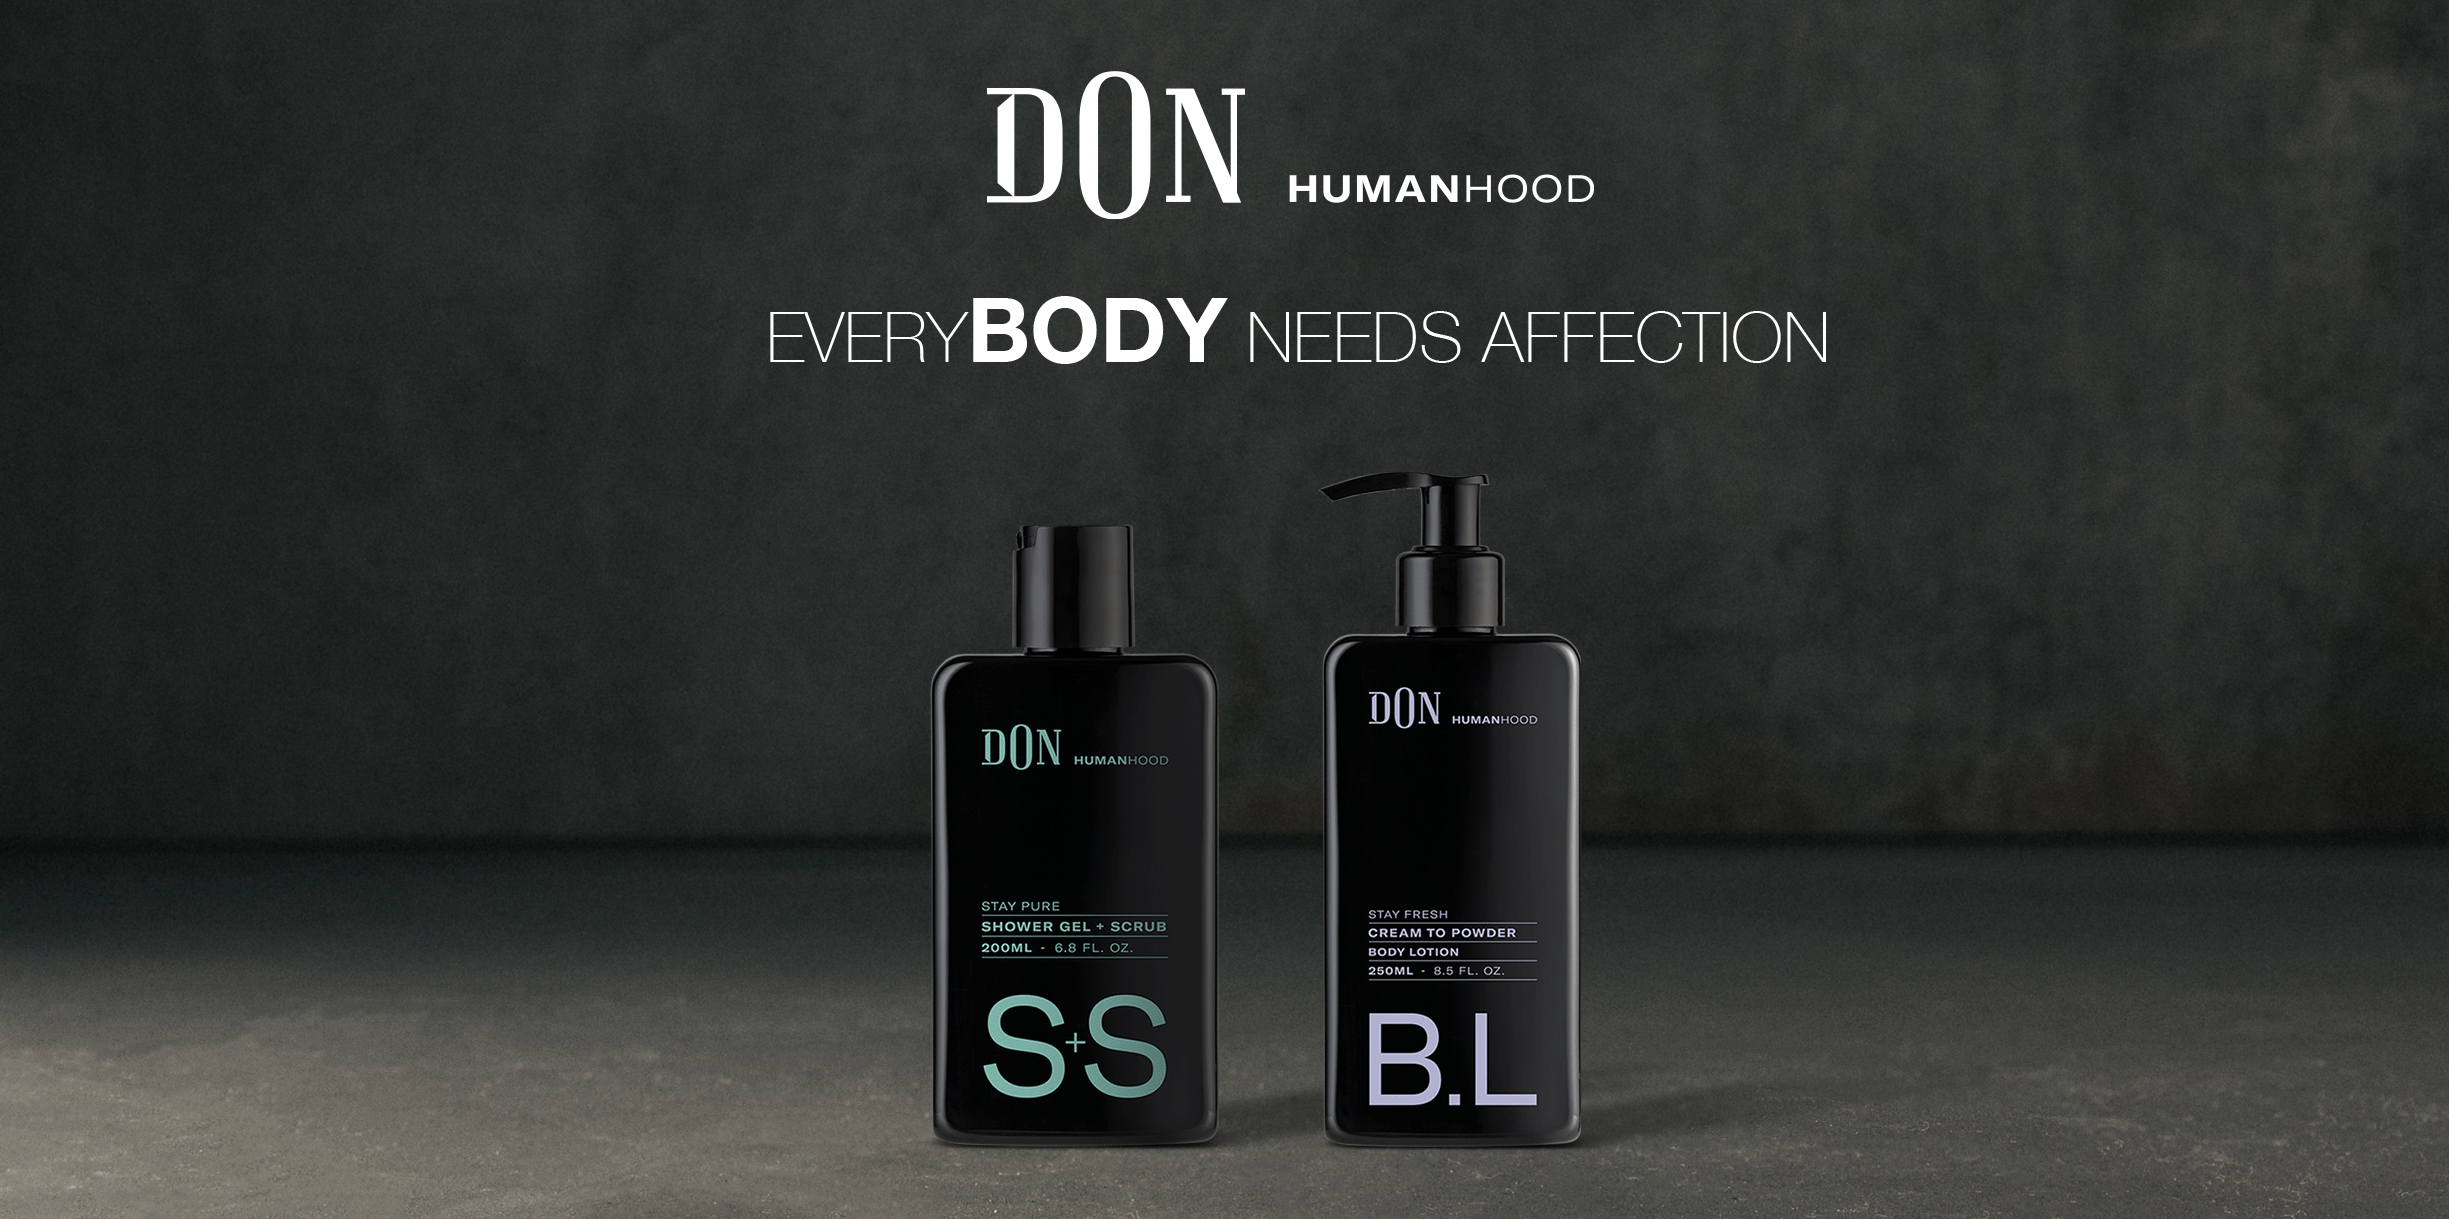 DON HUMANHOOD - BODY PRODUCTS